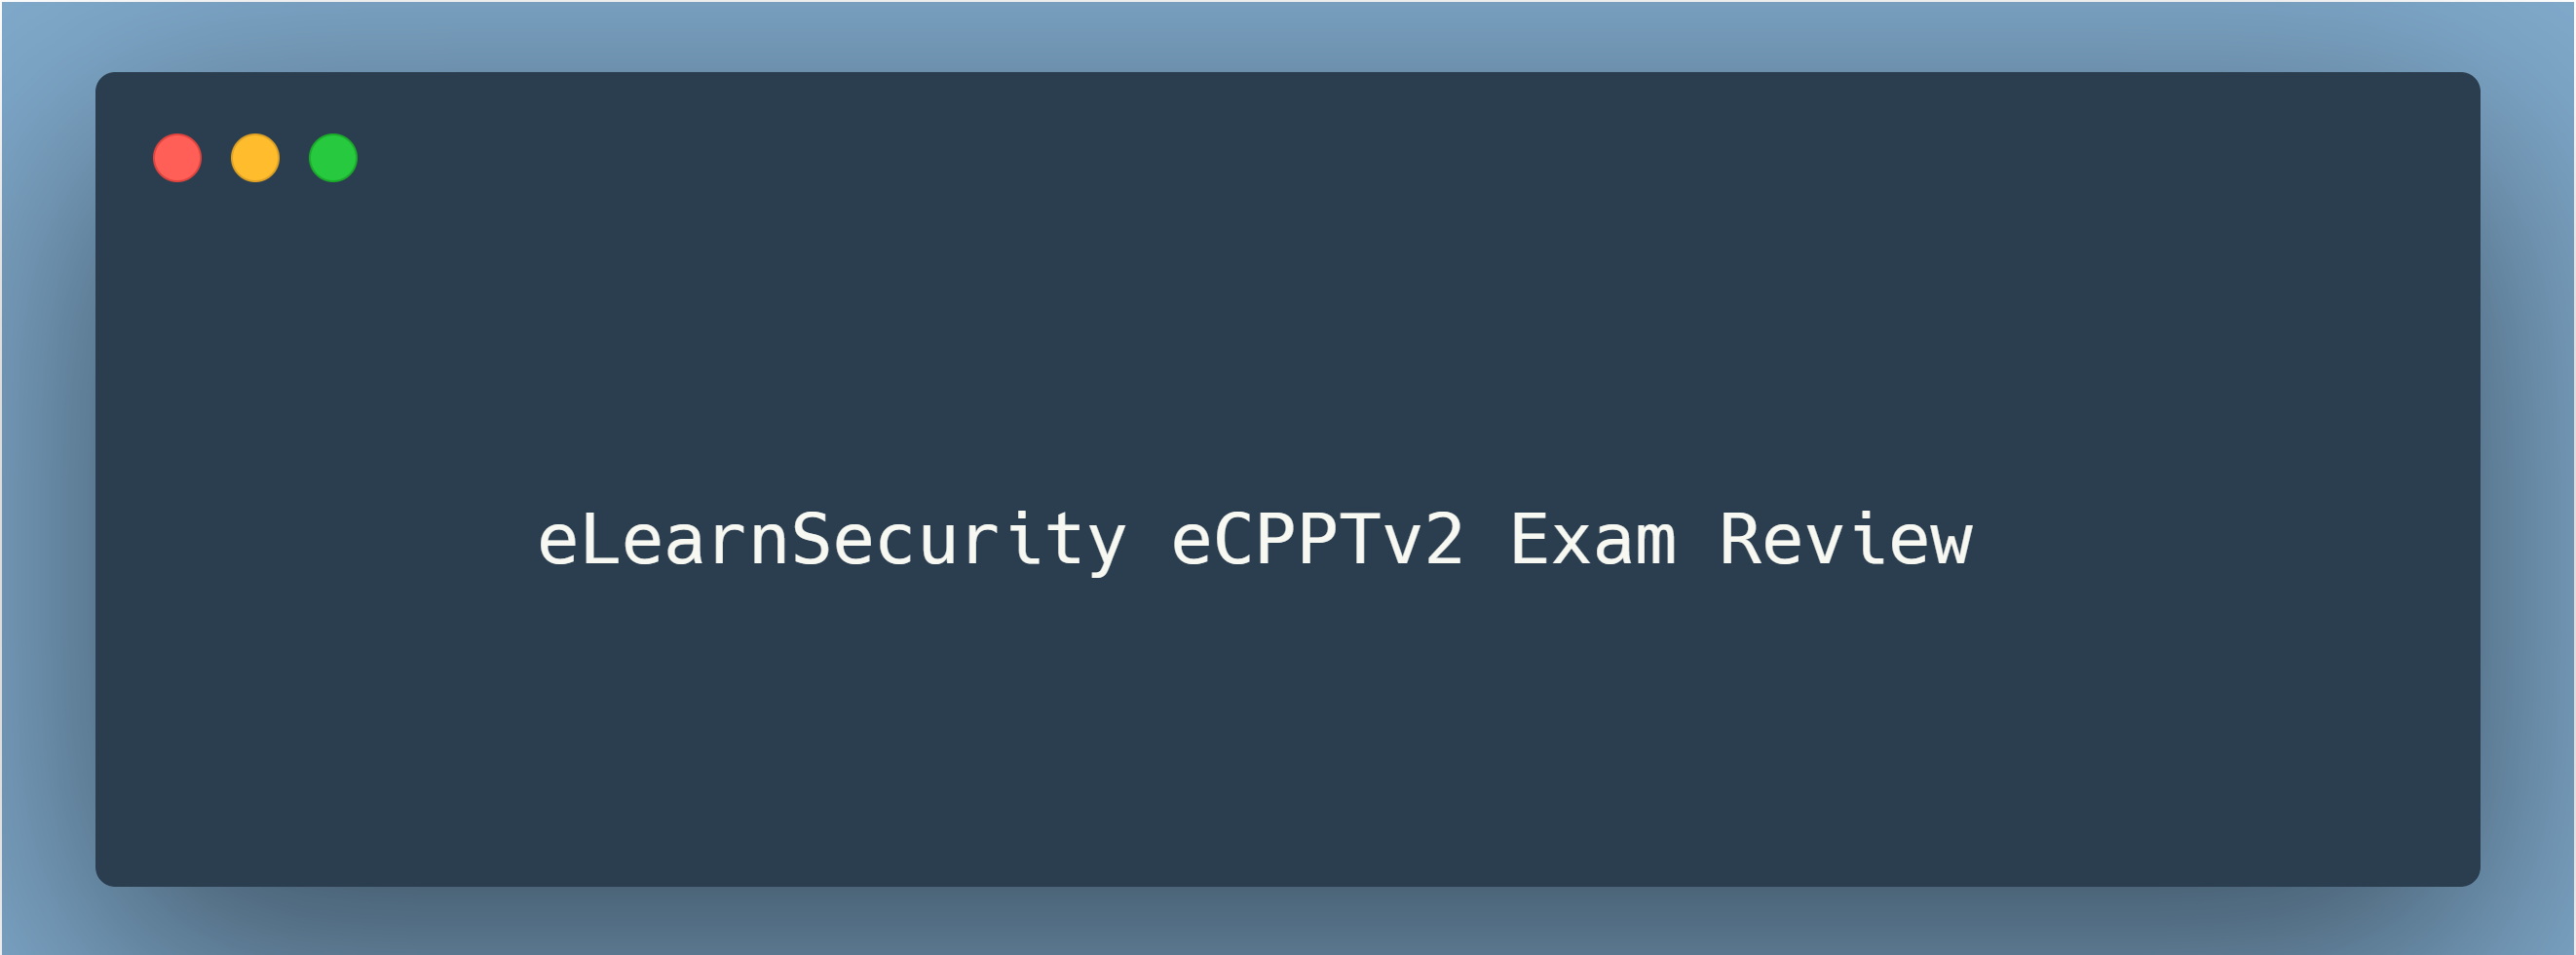 eLearnSecurity eCPPTv2 Exam Review